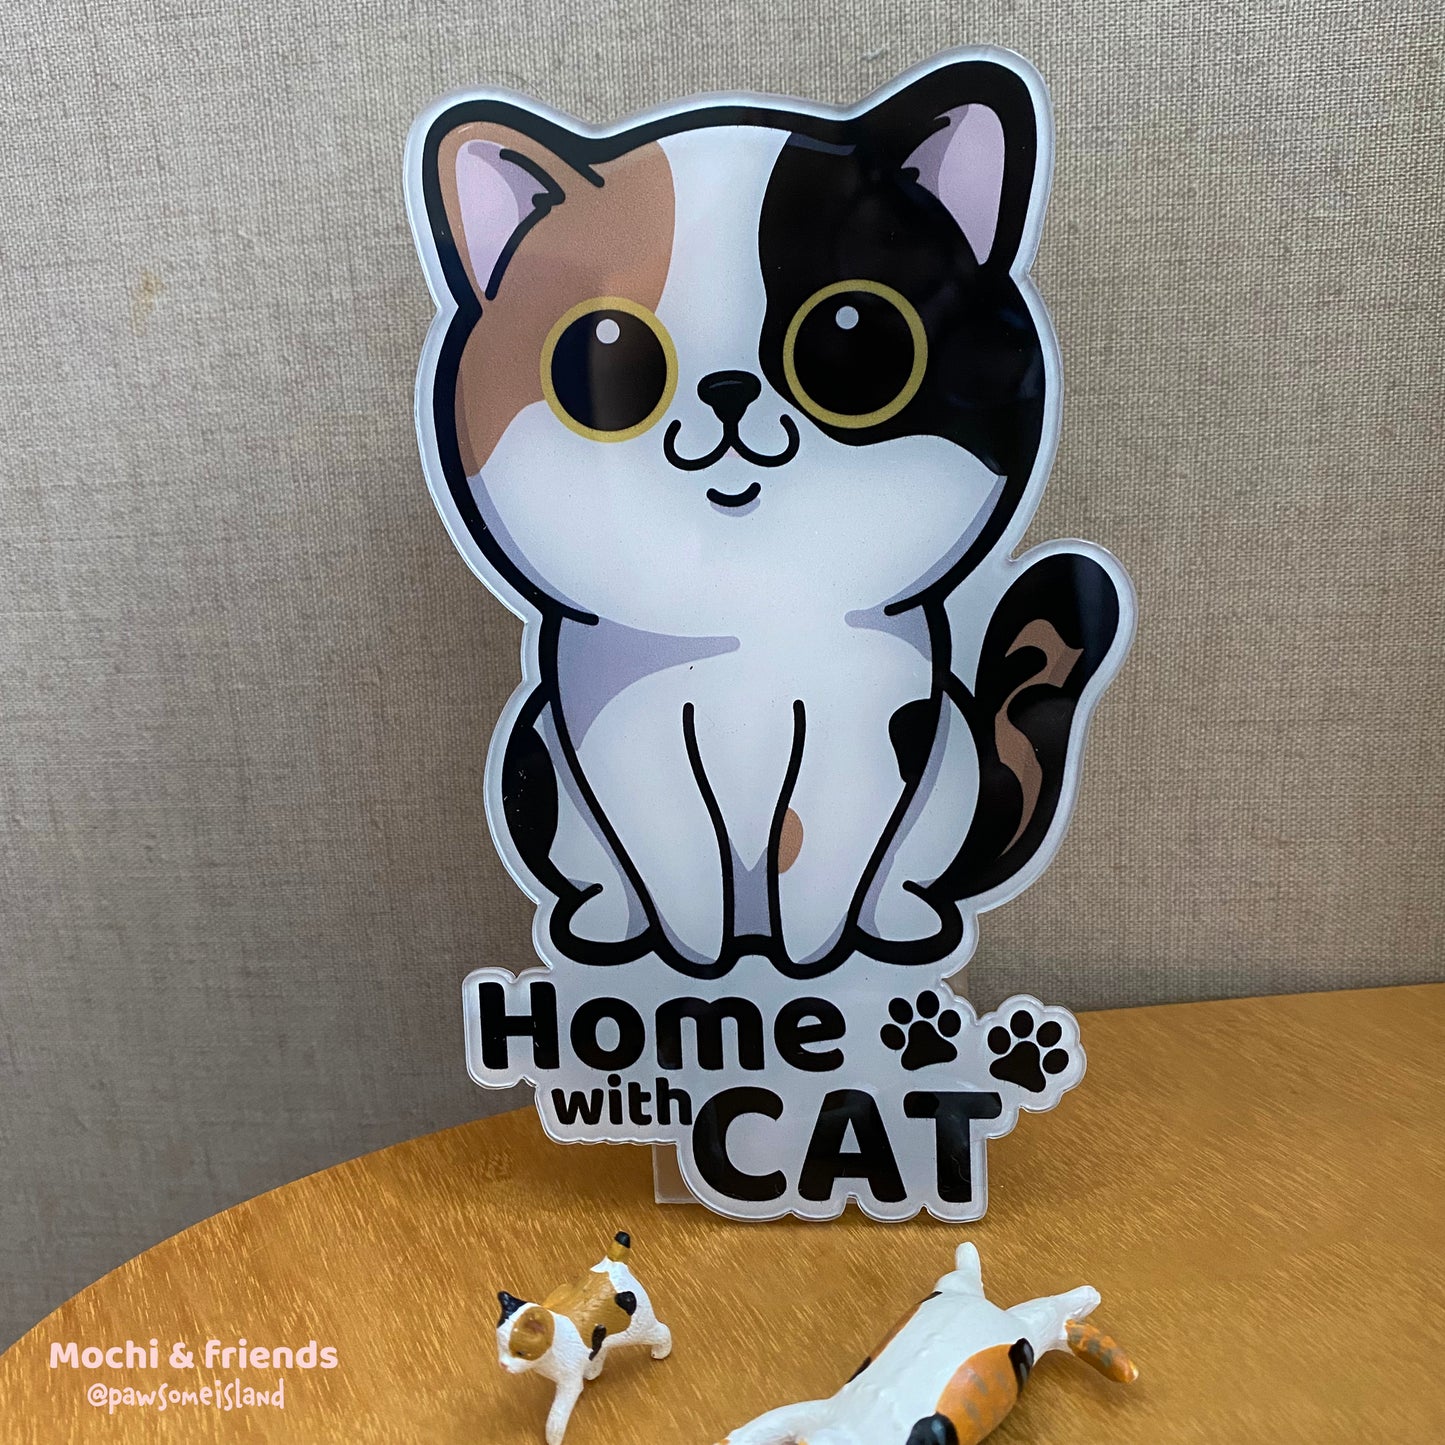 Mochi & friends 貓貓門牌 Home with cat adhesive sign